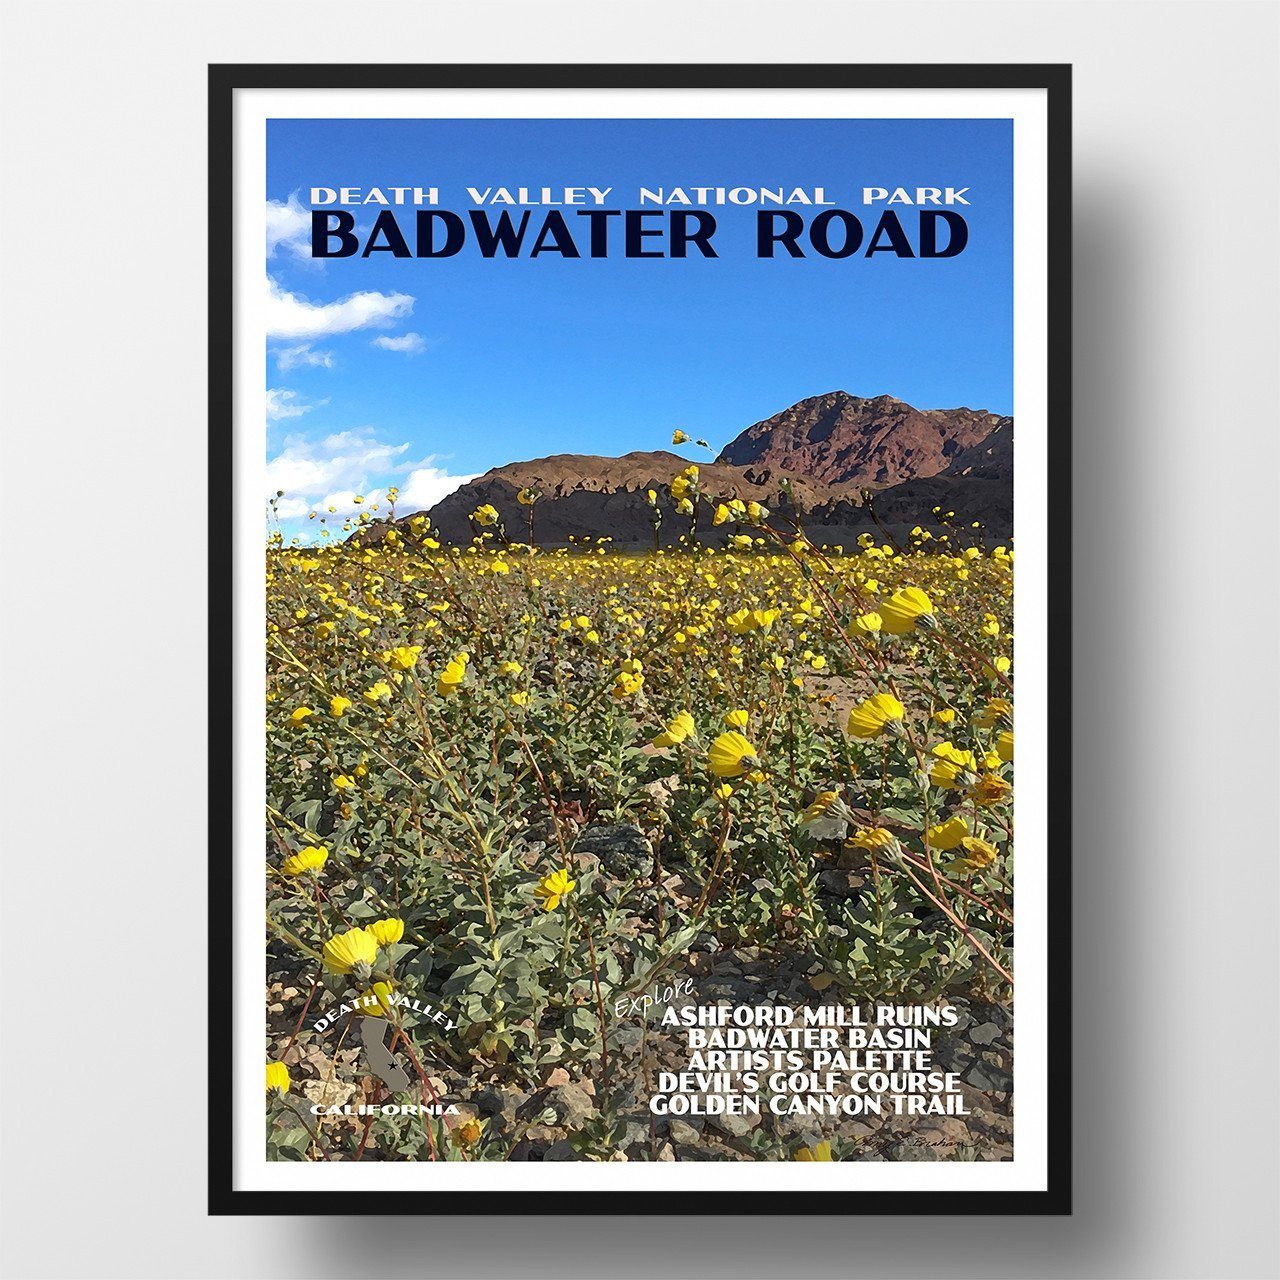 Death Valley National Park Poster-Badwater Road